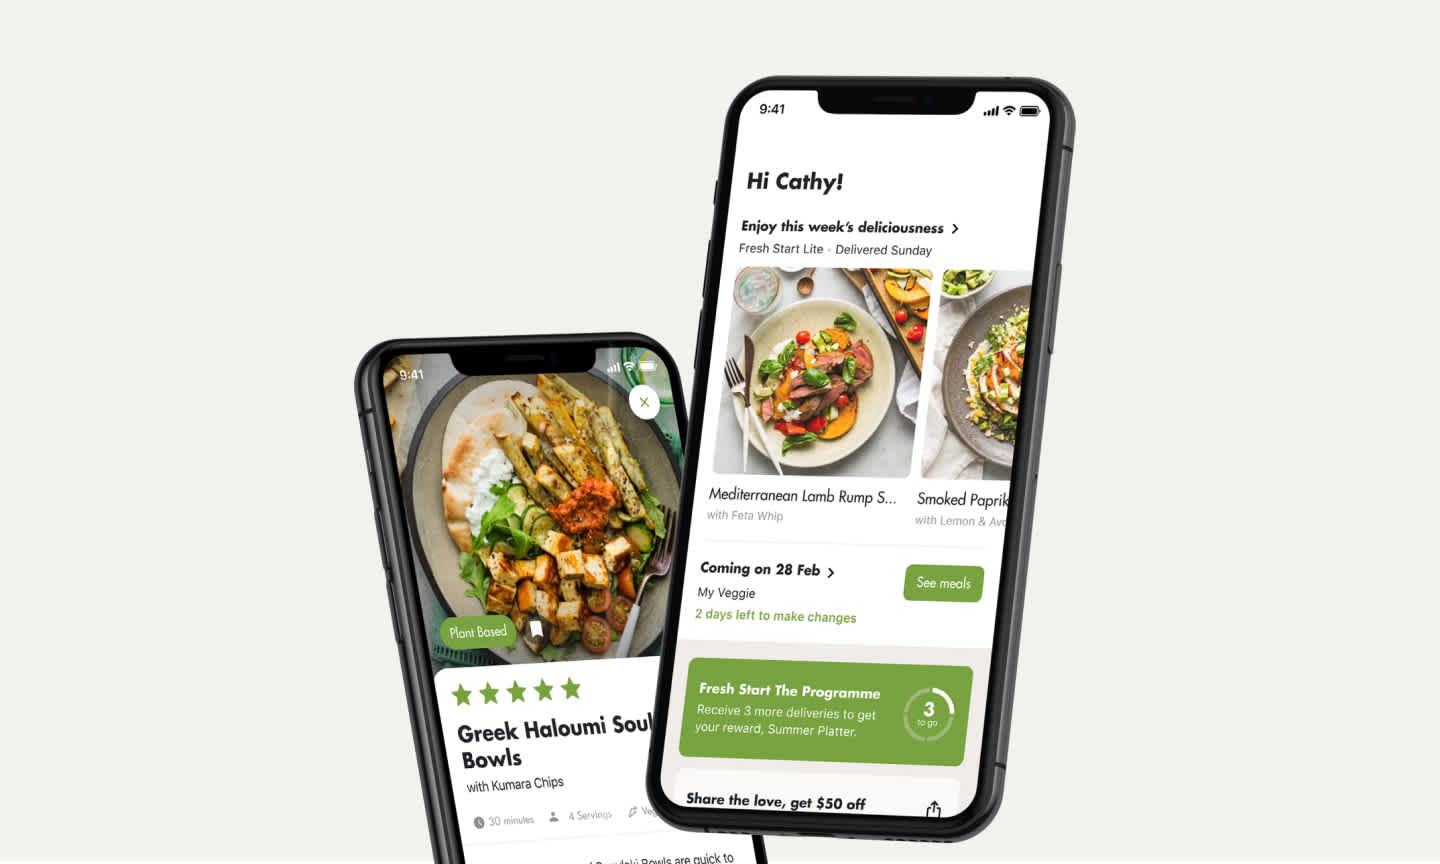 My Food Bag hero image, showing the app in use on a phone